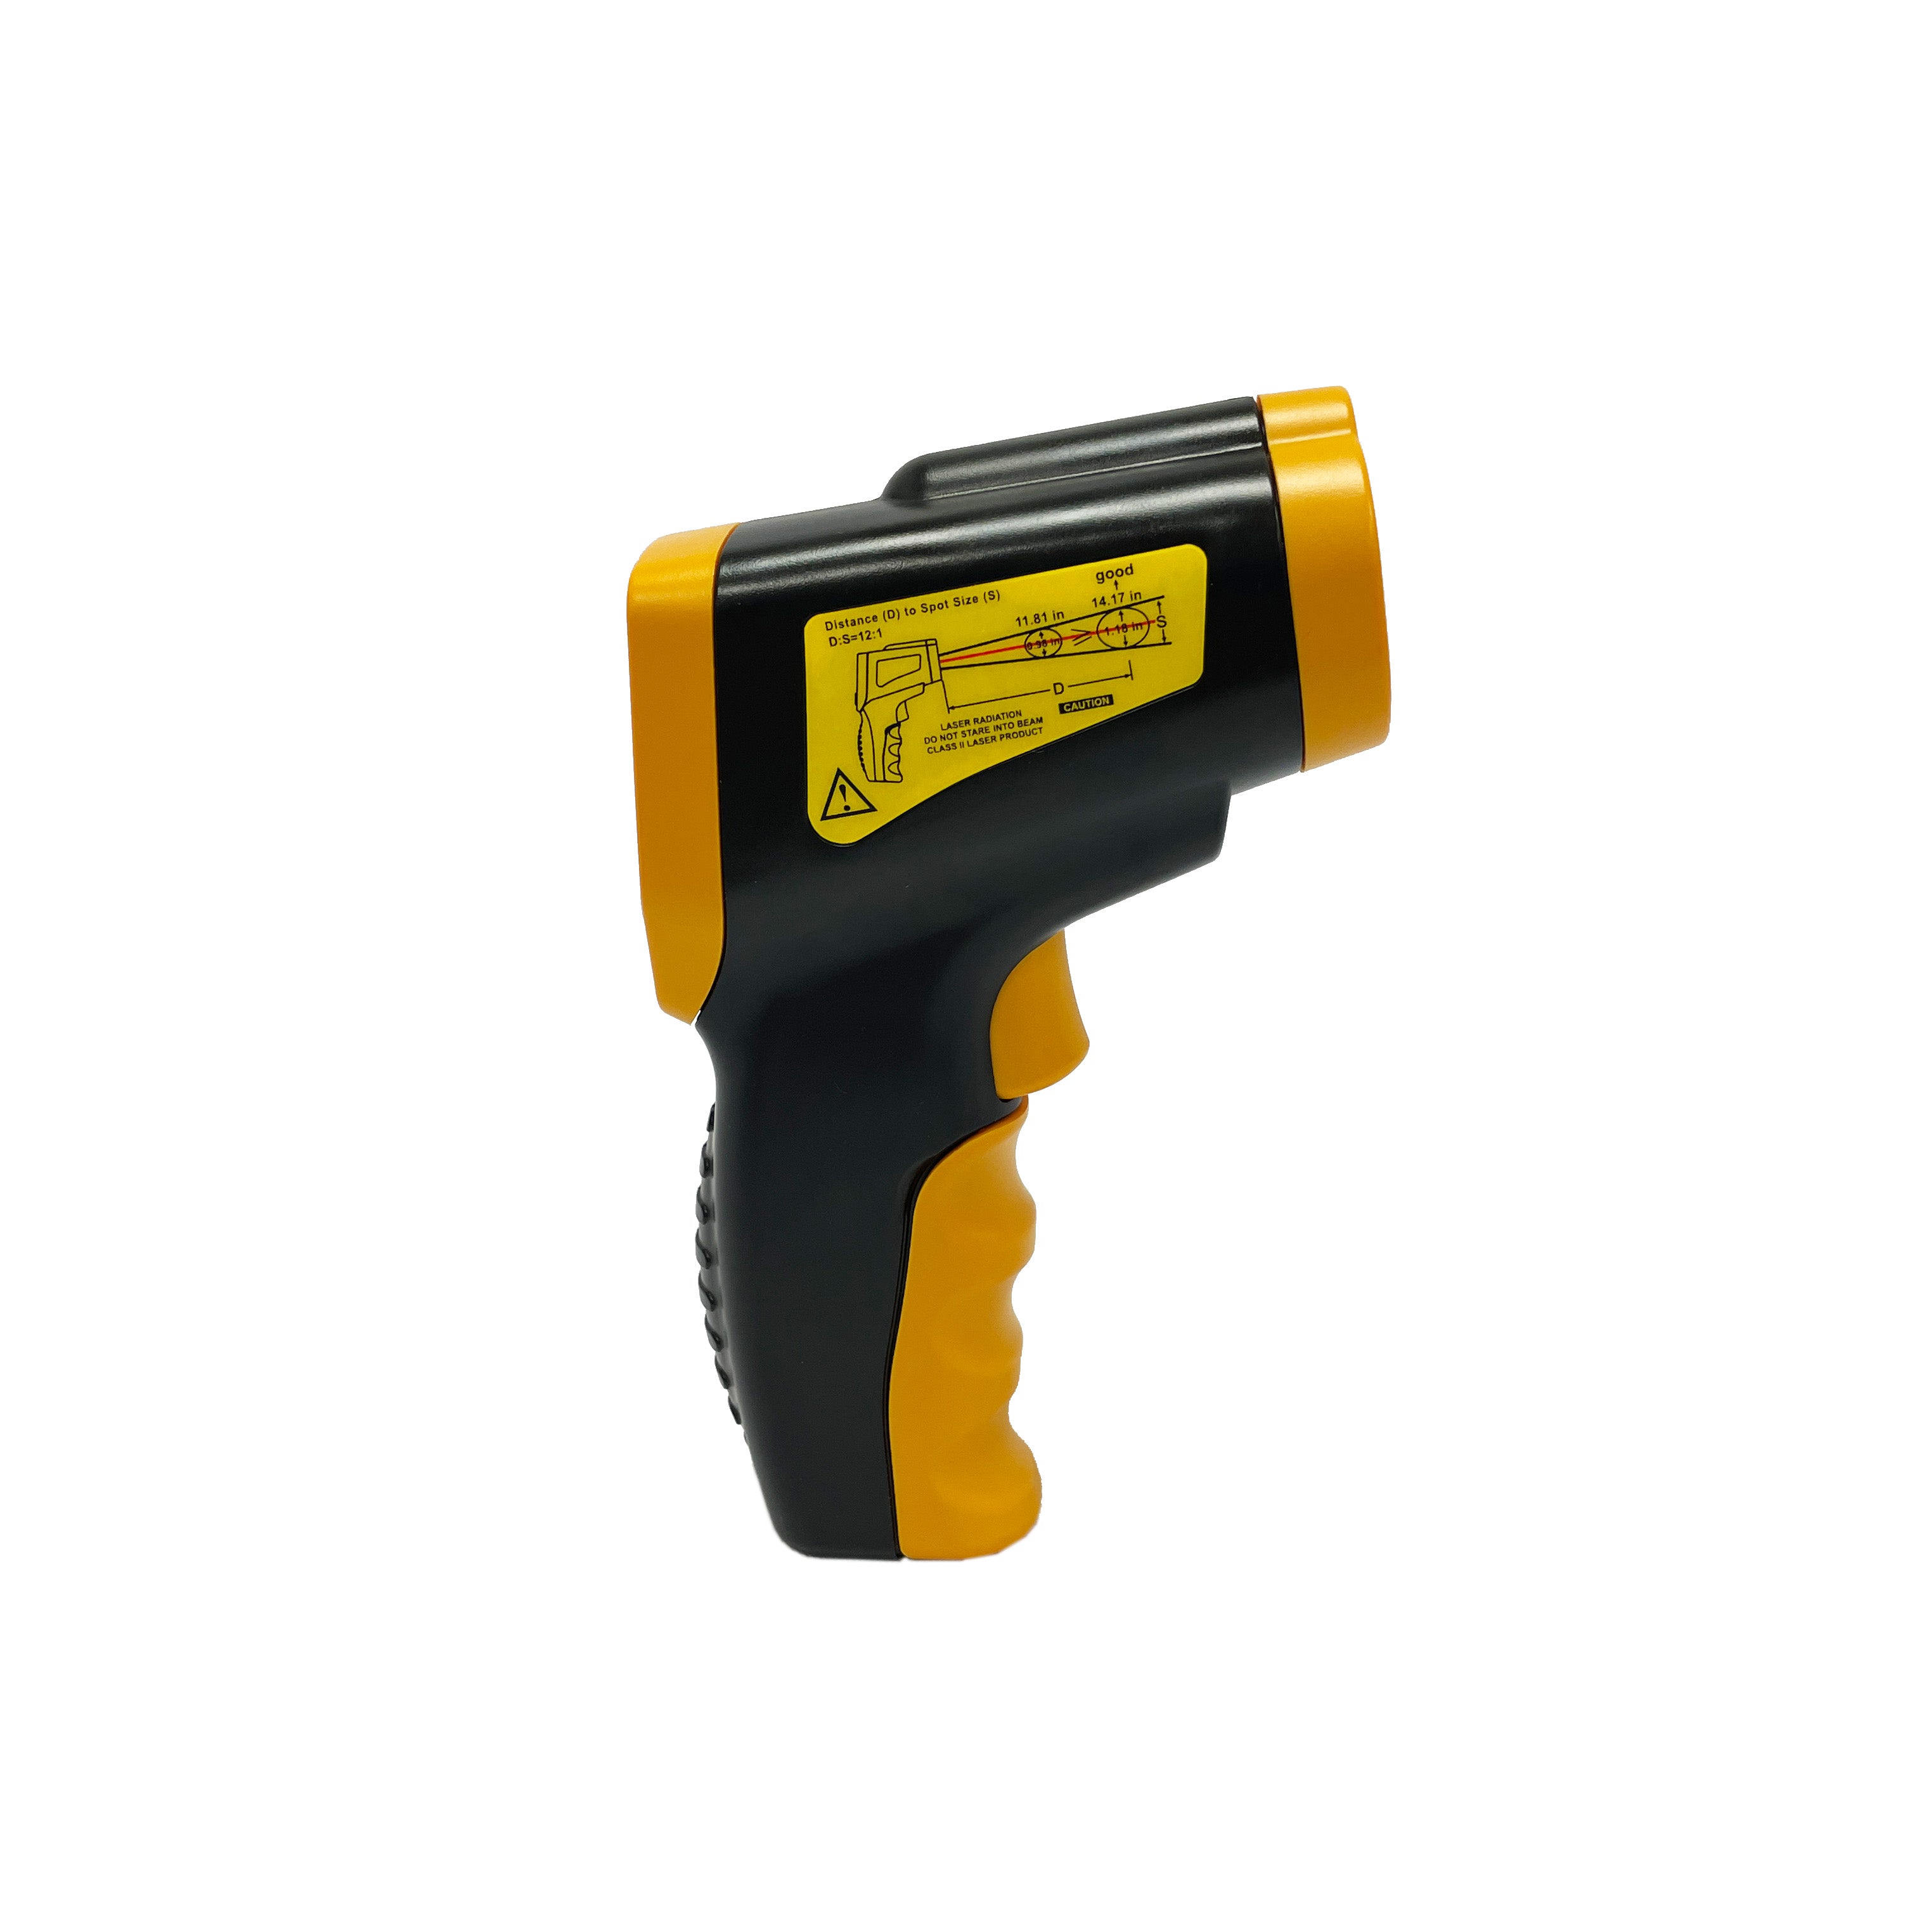  Etekcity Lasergrip 800 Temperature Gun-58℉ to 1382℉ with 16:1  DTS Ratio, High Laser Temp IR Tool for Cooking, Grill, Pizza Oven, Griddle,  Engine, HVAC, Not for Human, Yellow : Automotive